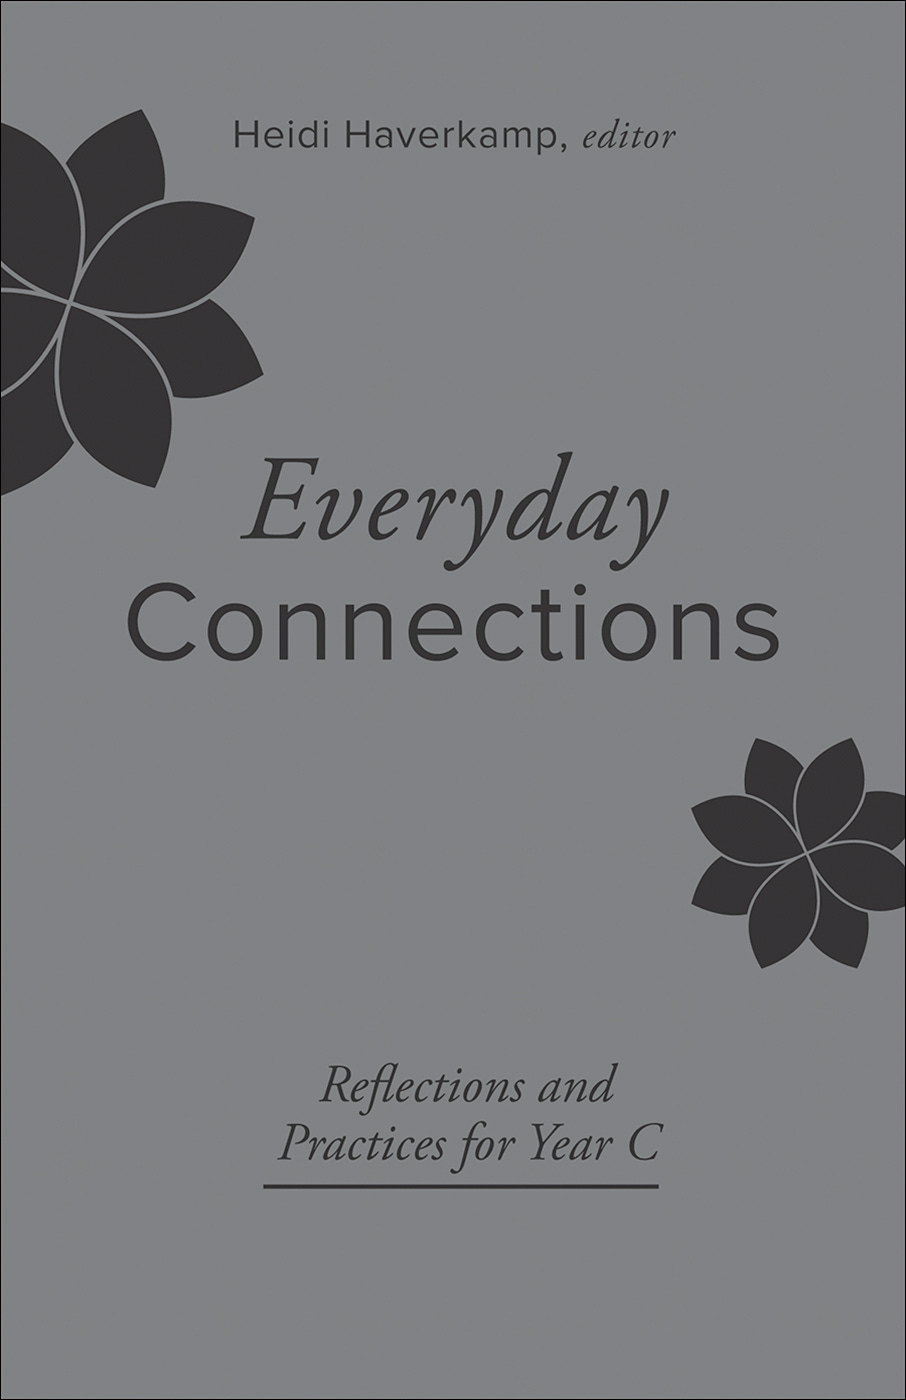 Cover of new book, "Everyday Connections"